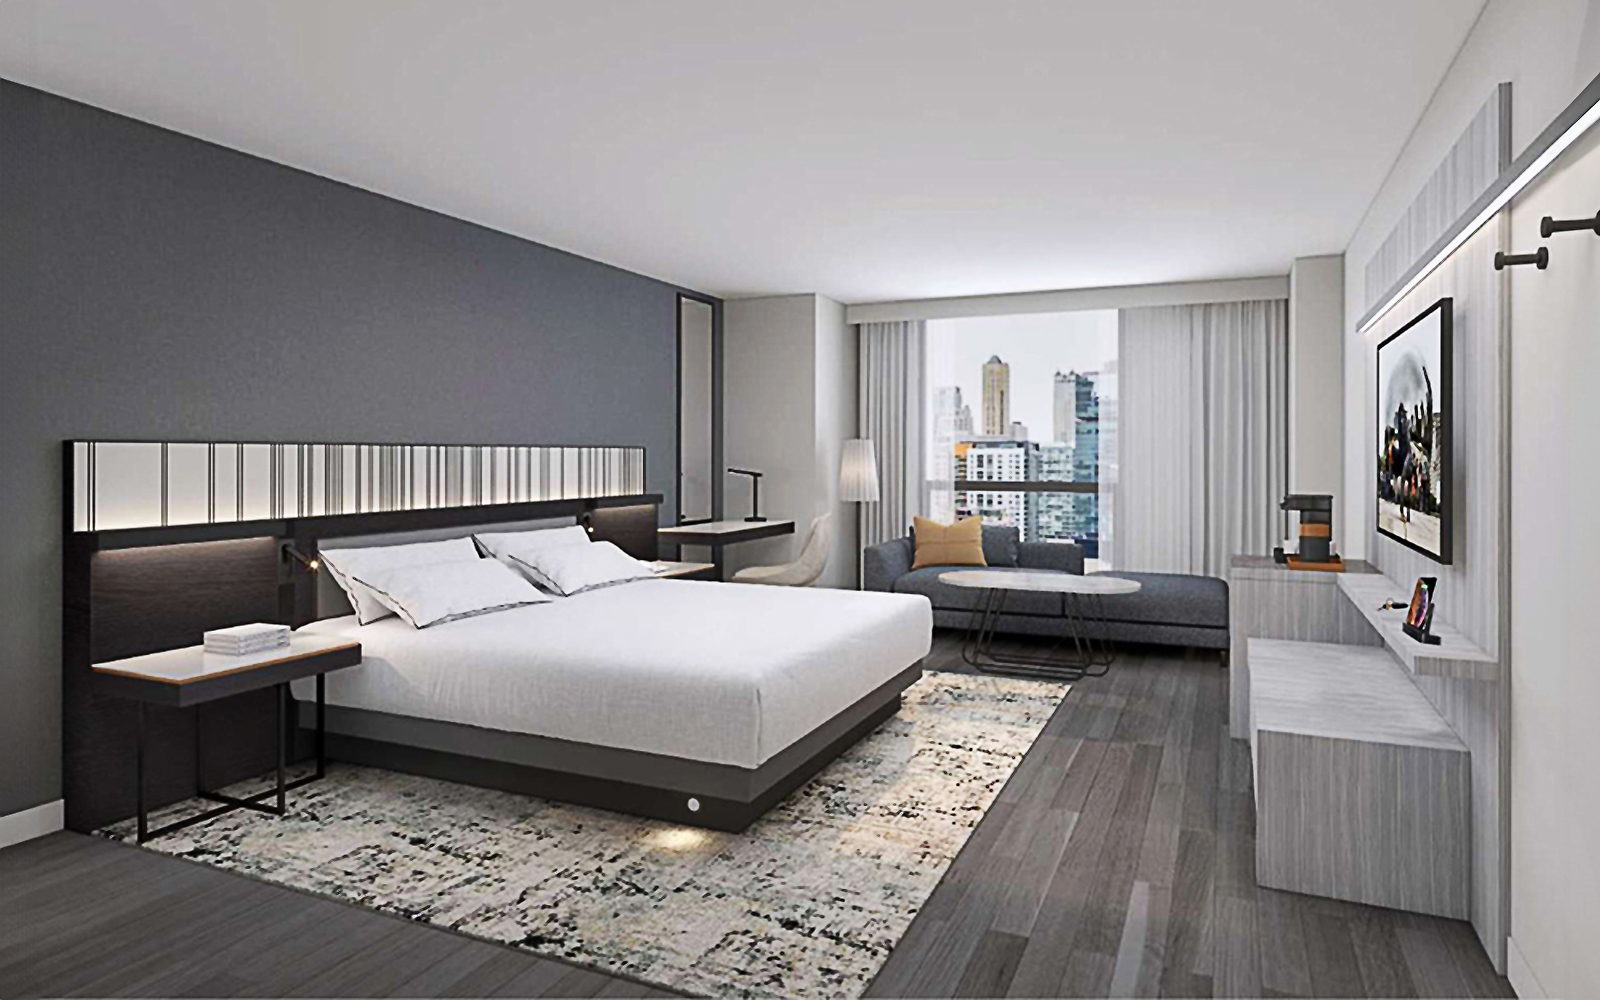 The headboard design represents 360 years of Chicago's storied architectural timeline.